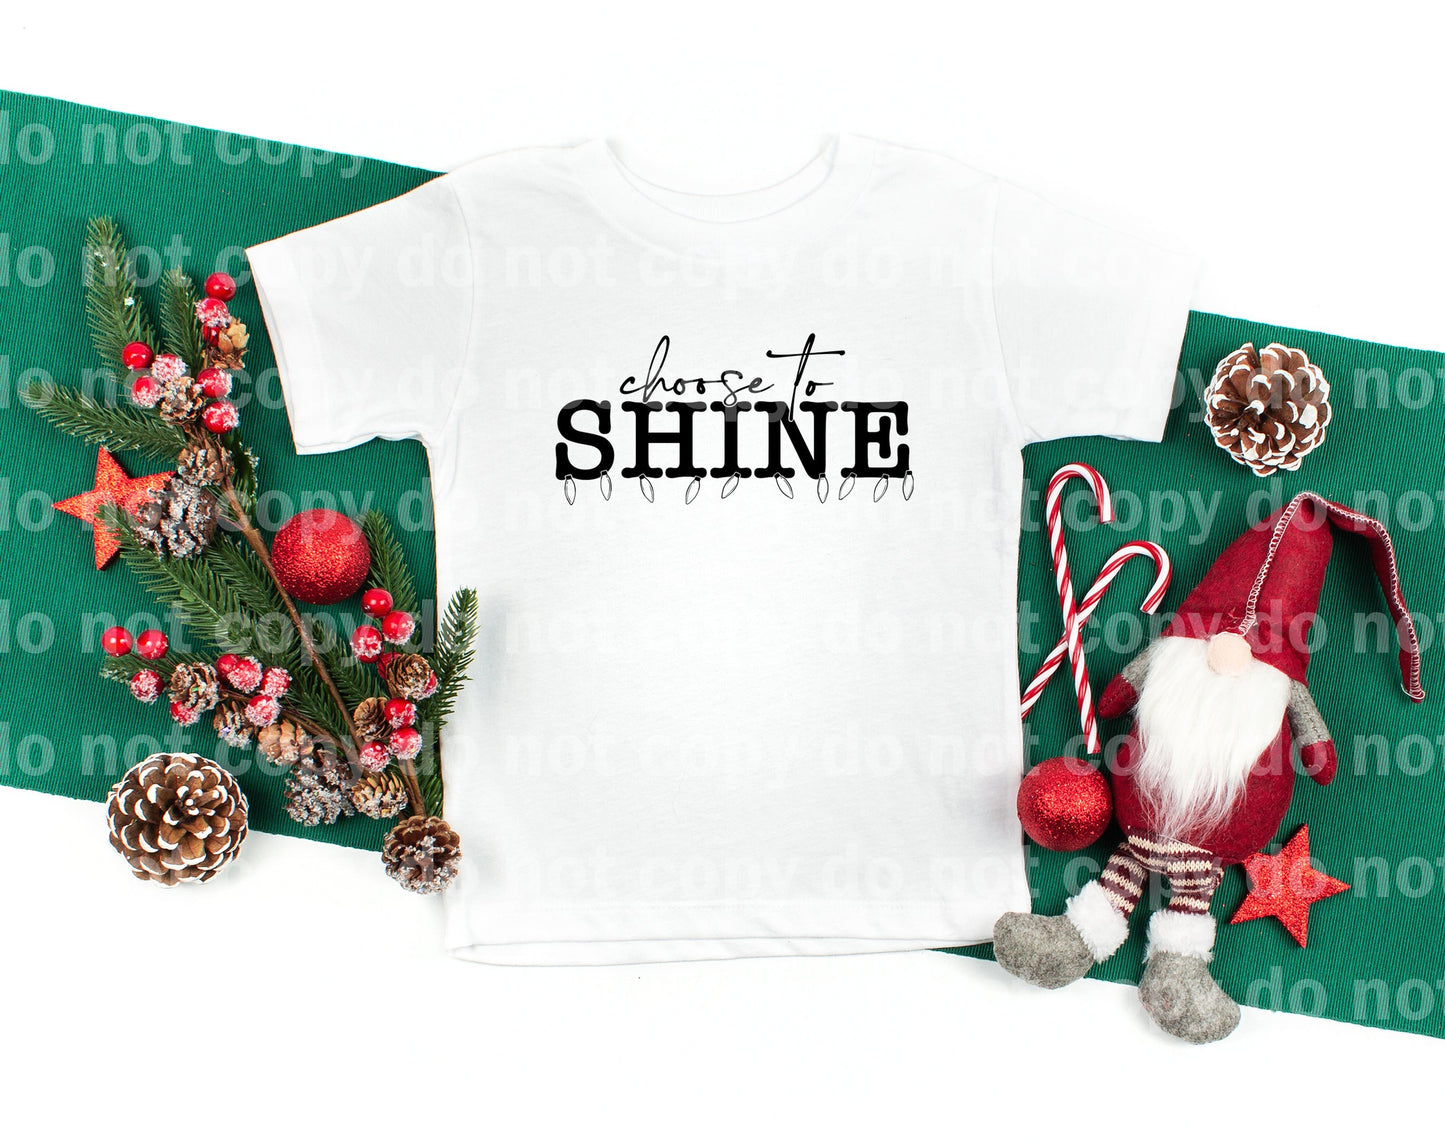 Choose To Shine Full Color/One Color Dream Print or Sublimation Print